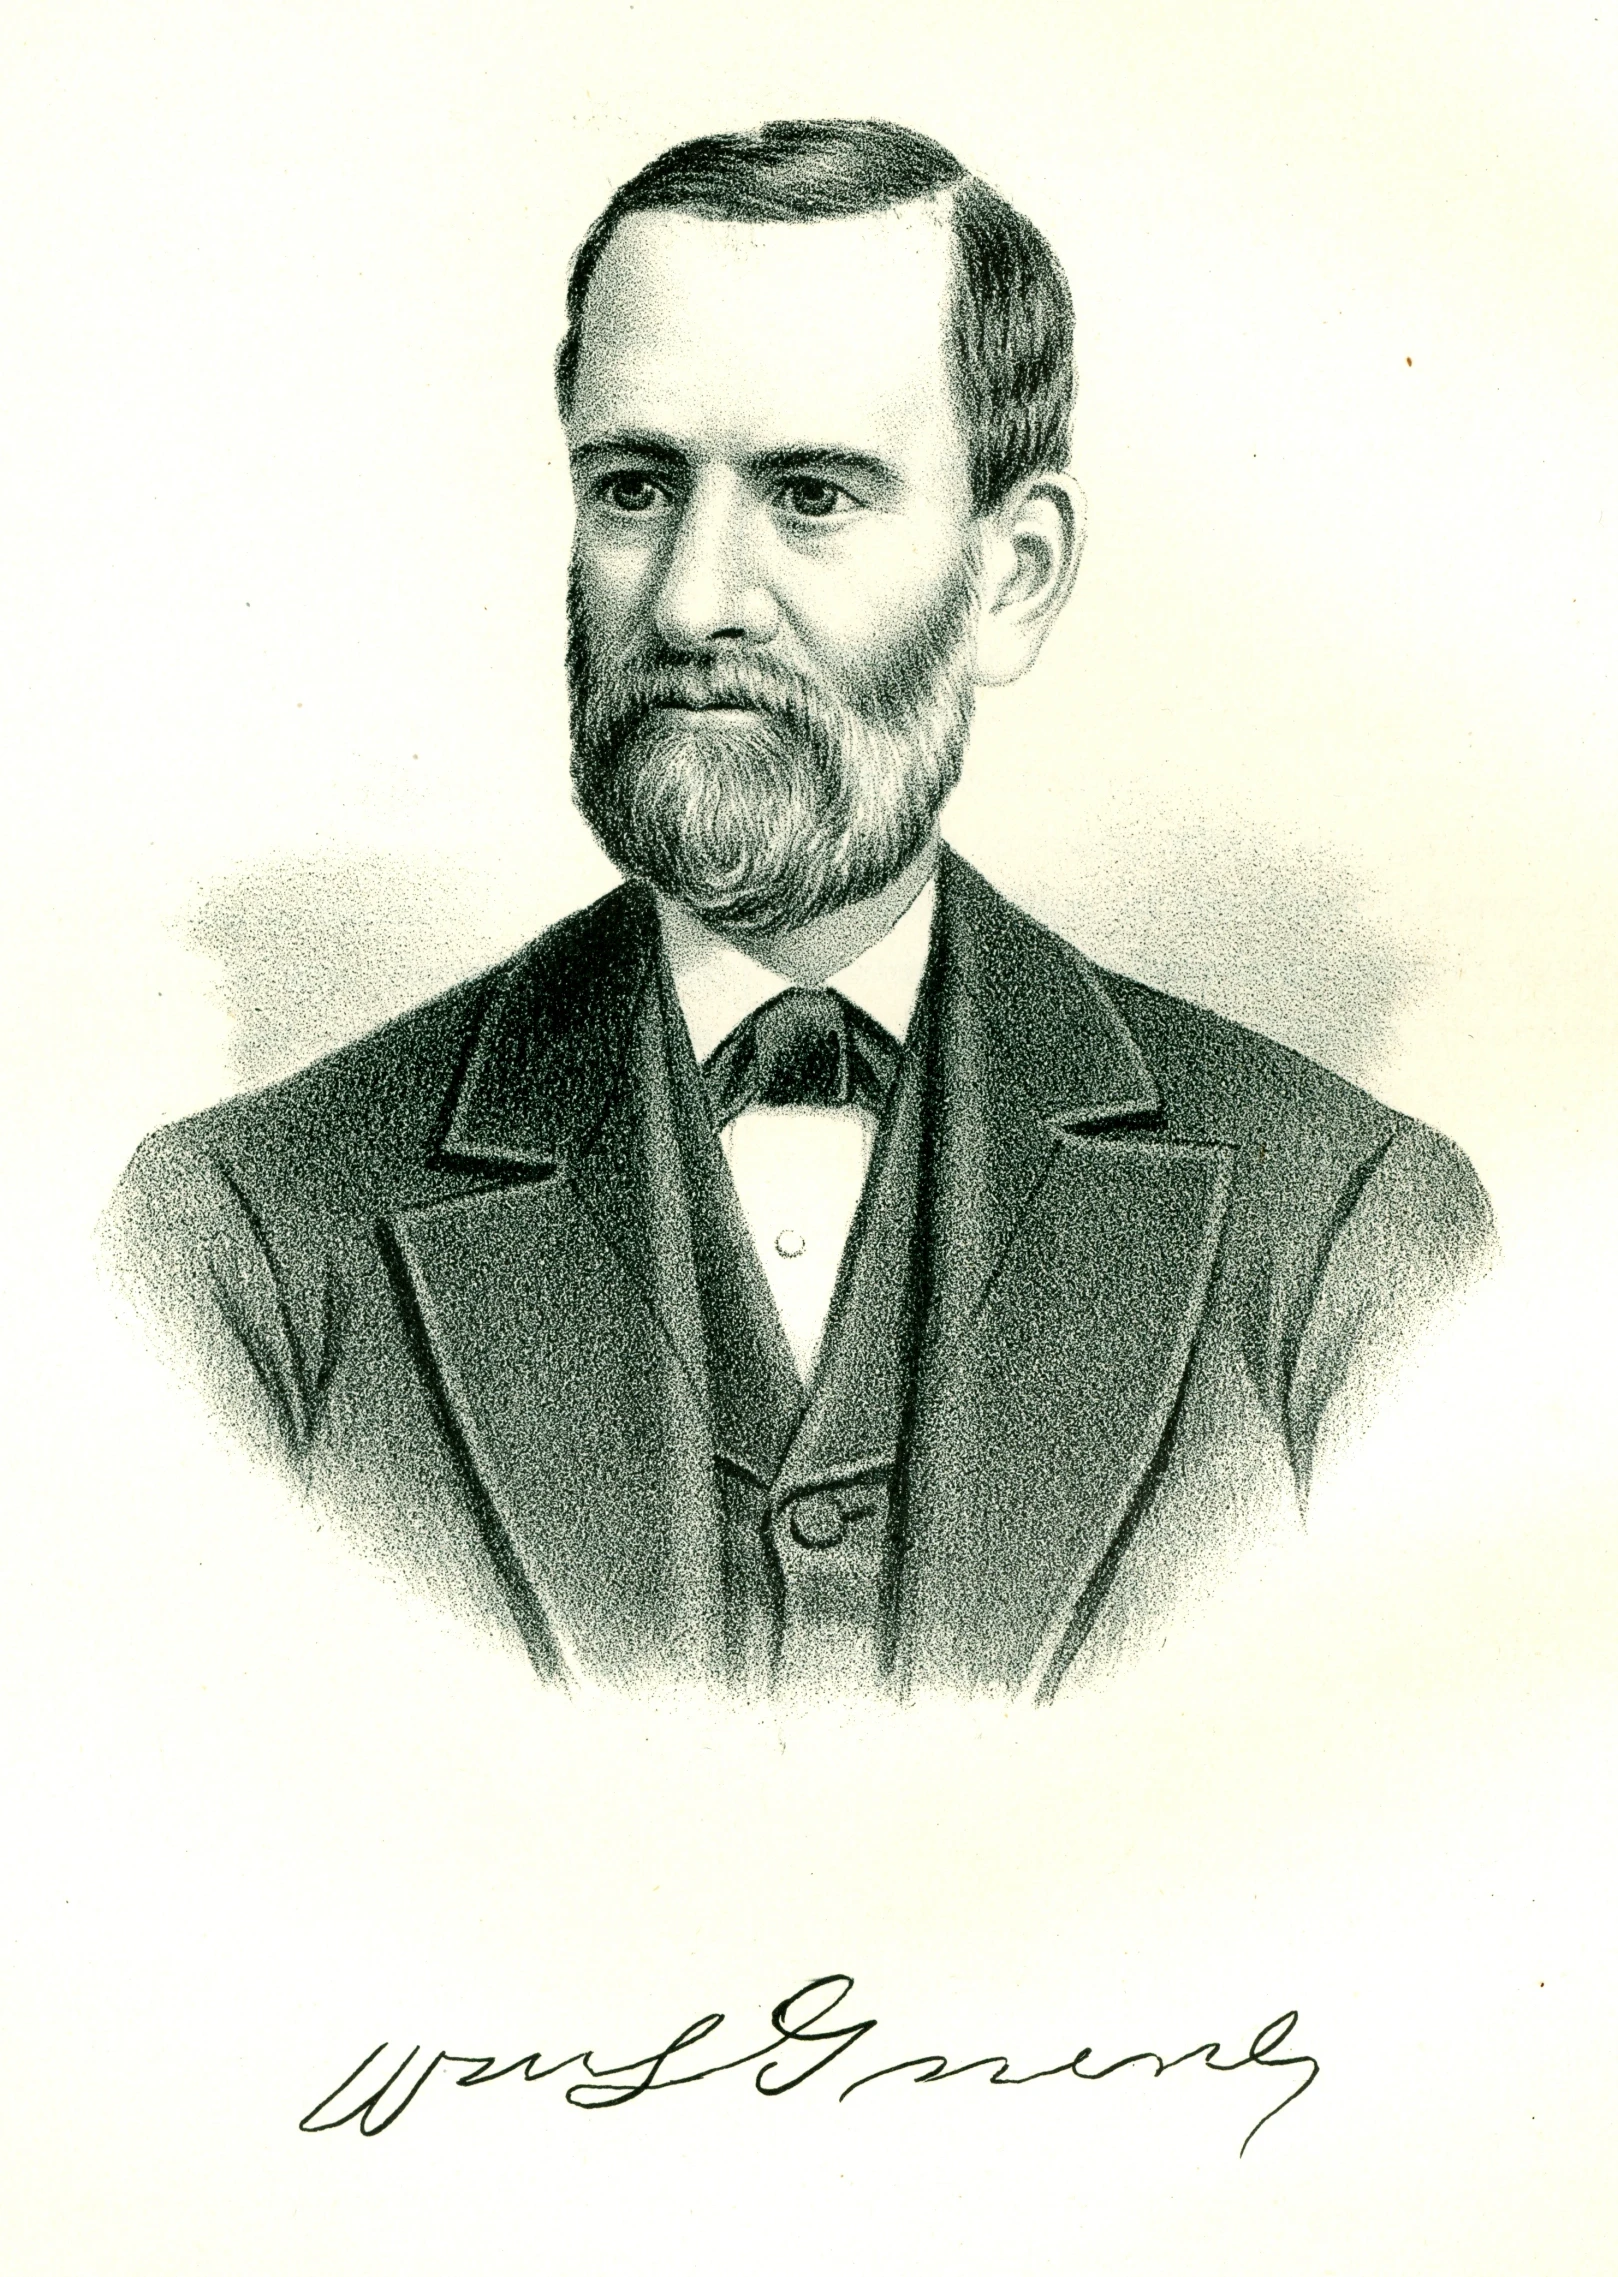 an engraved drawing of a man in a suit and tie